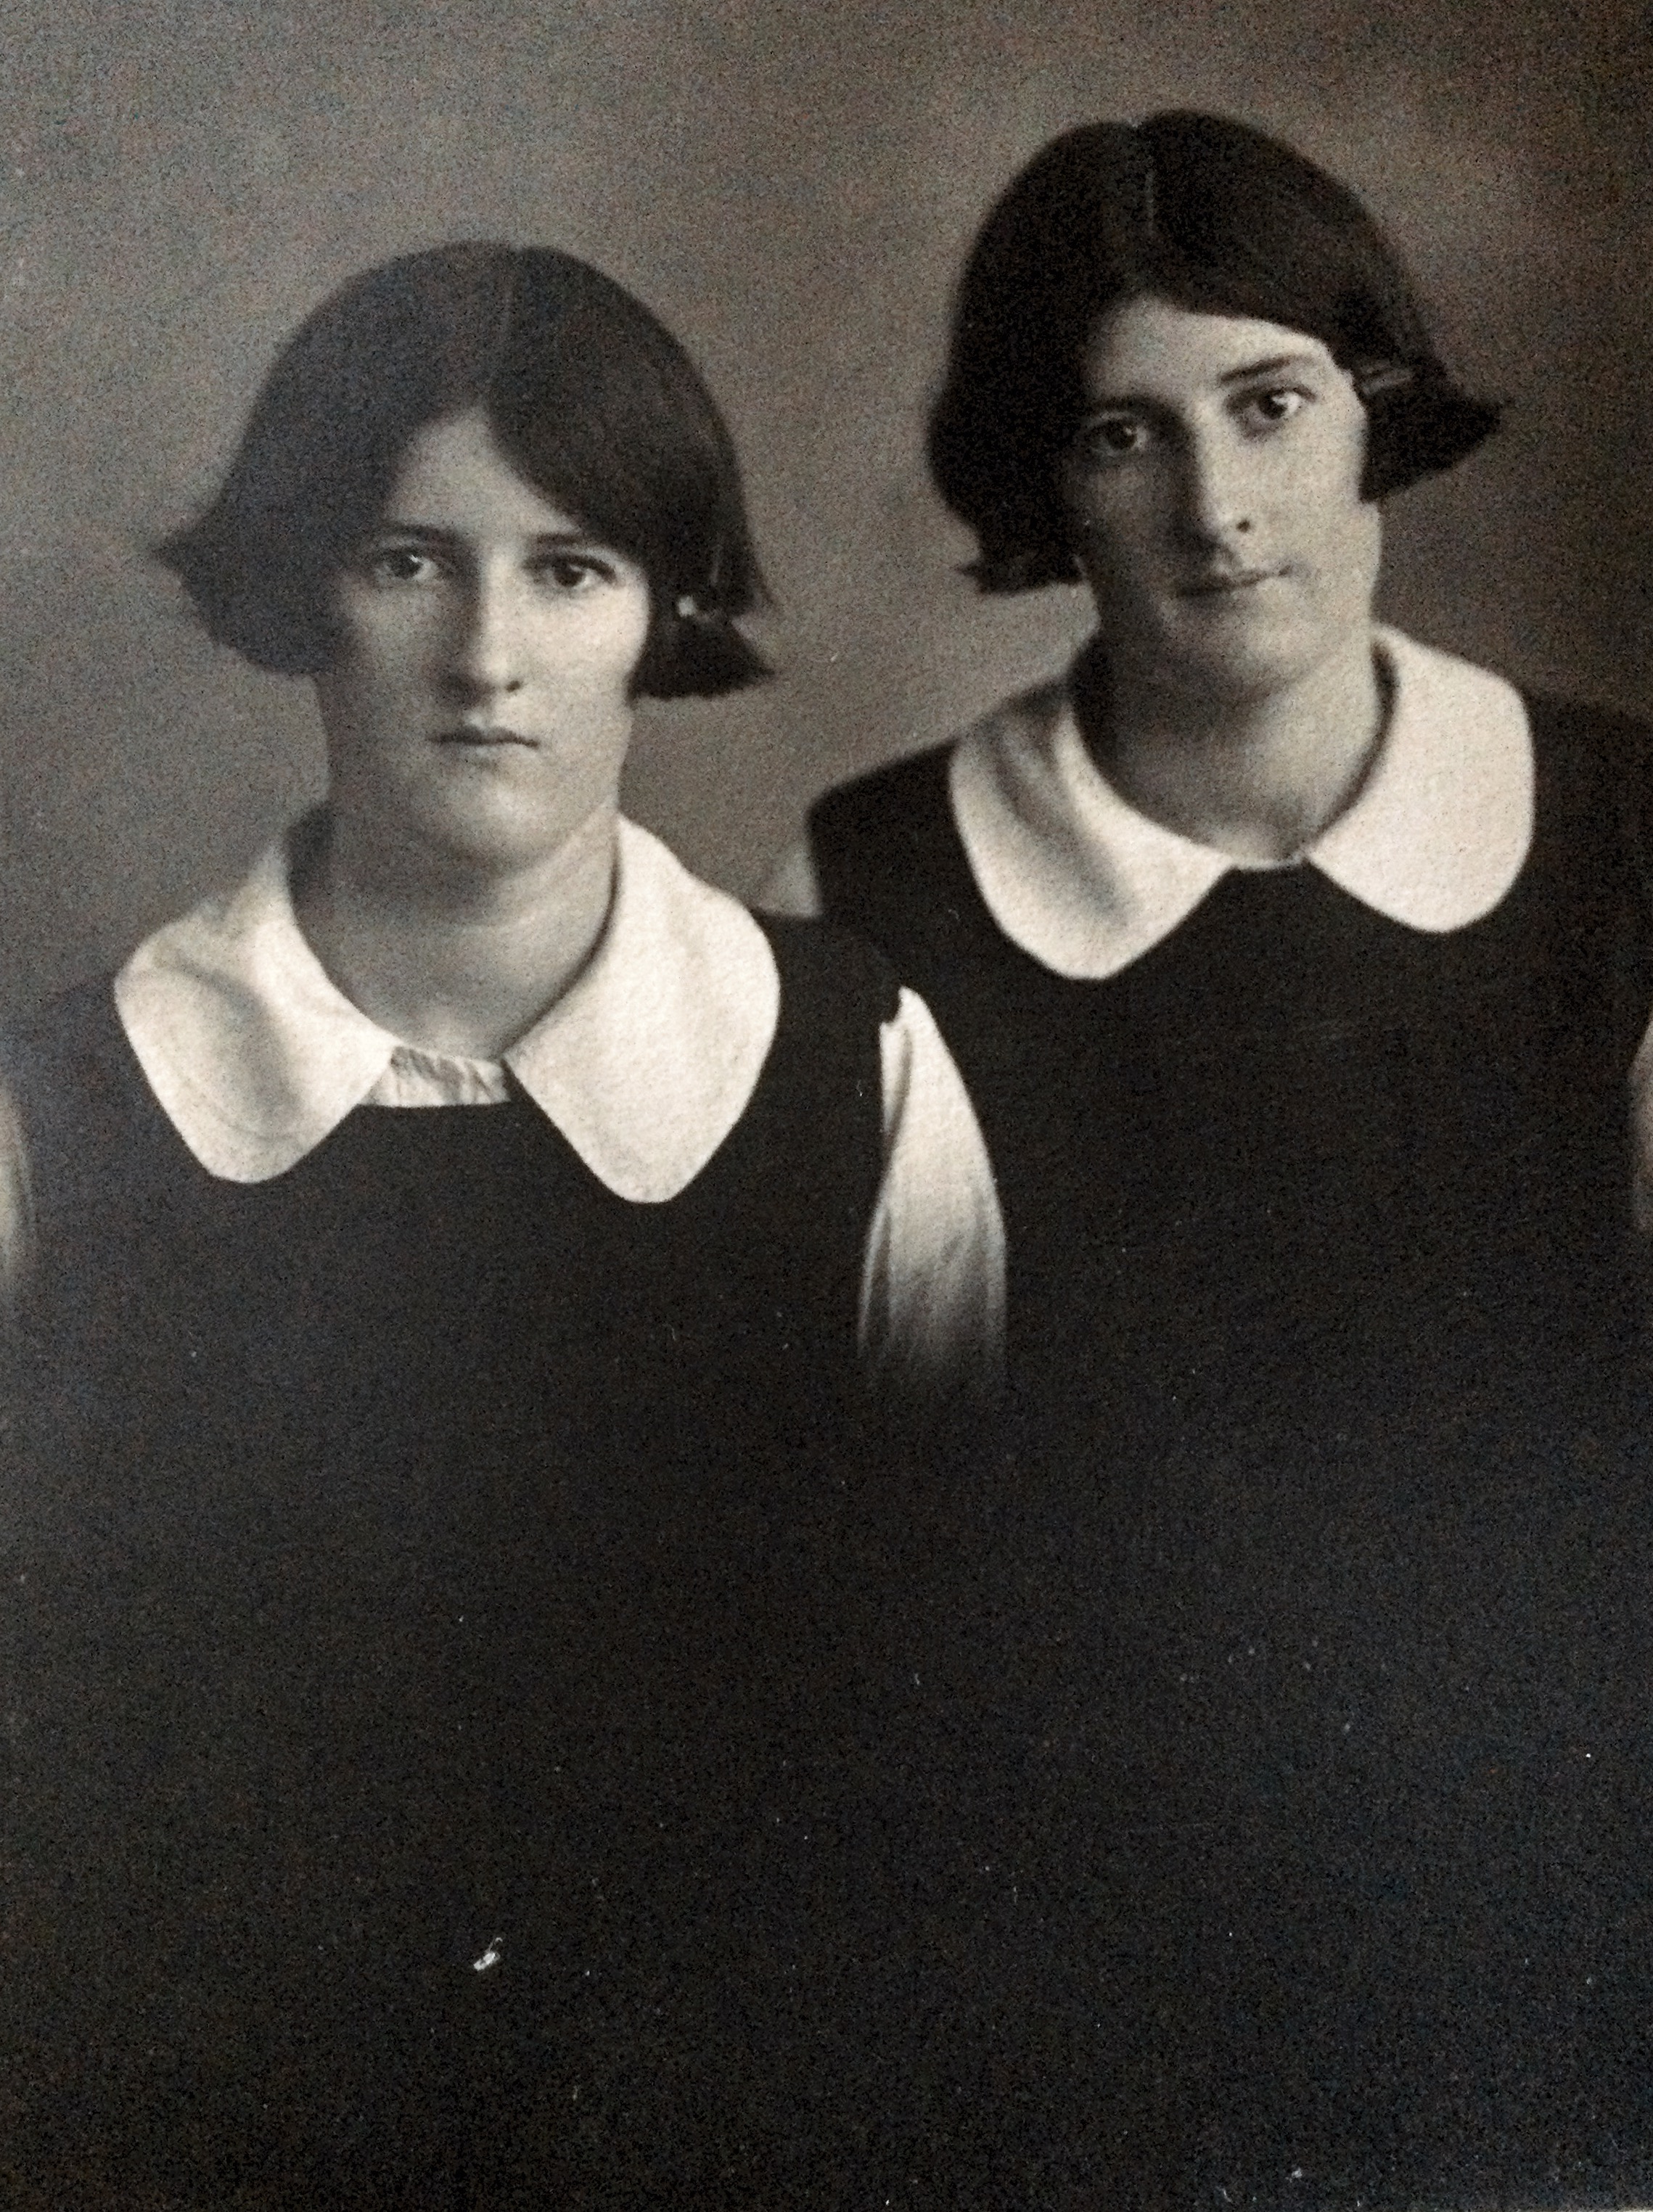 Dorothy and Phyllis Davies, Papatoetoe, Auckland ,New Zealand. March 1925, aged 12.